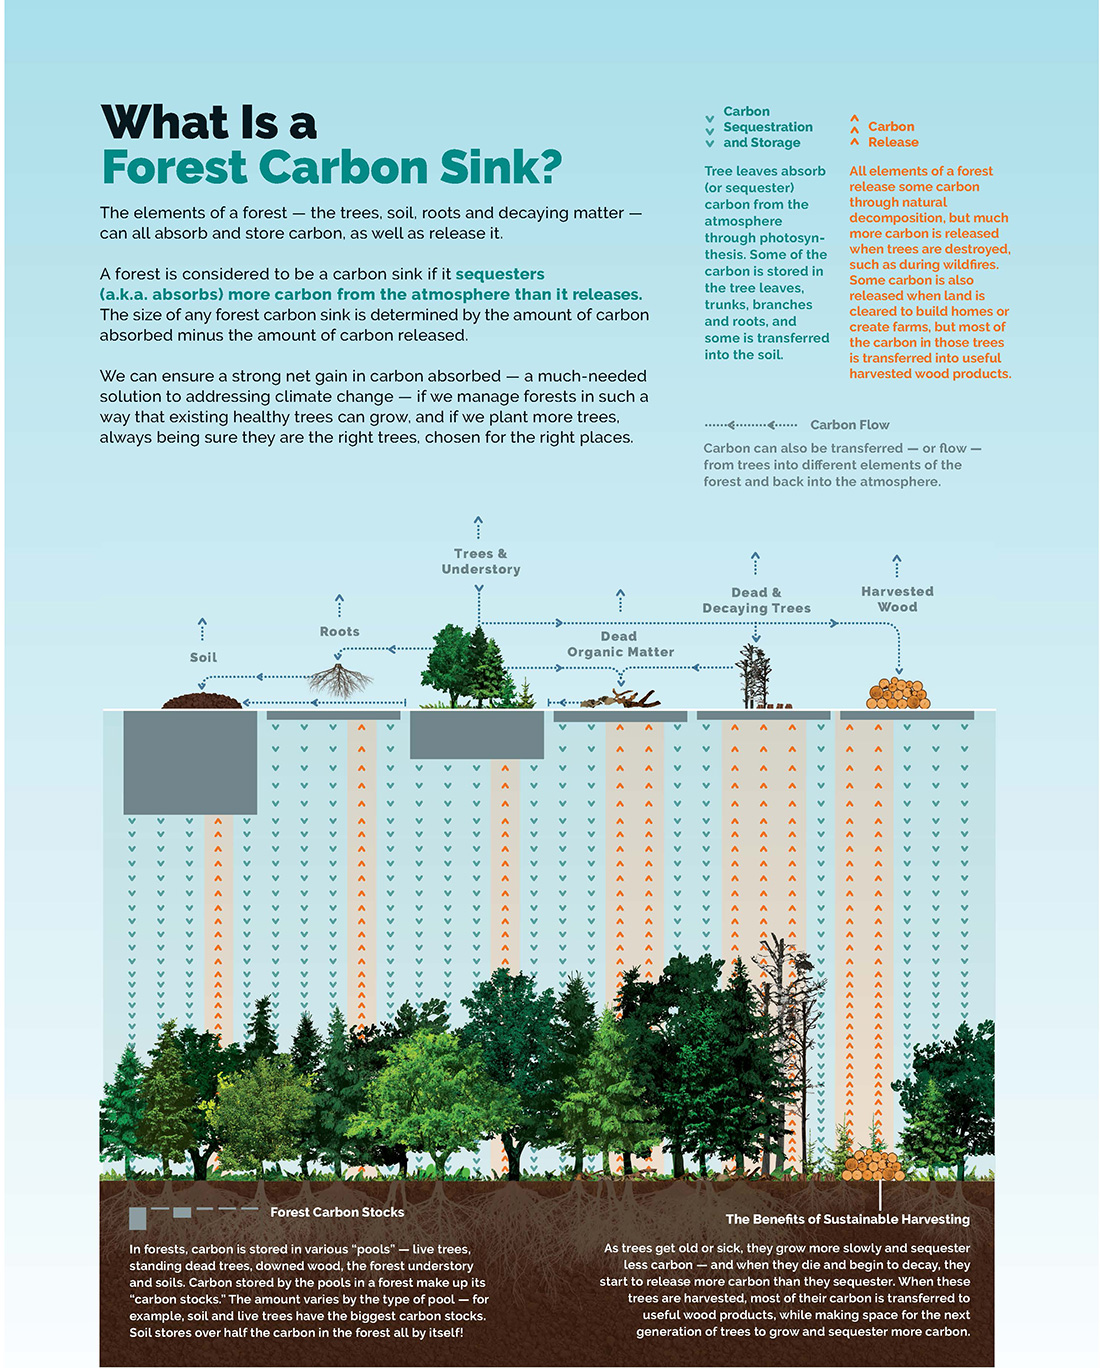 Learn how a forest carbon sink works.